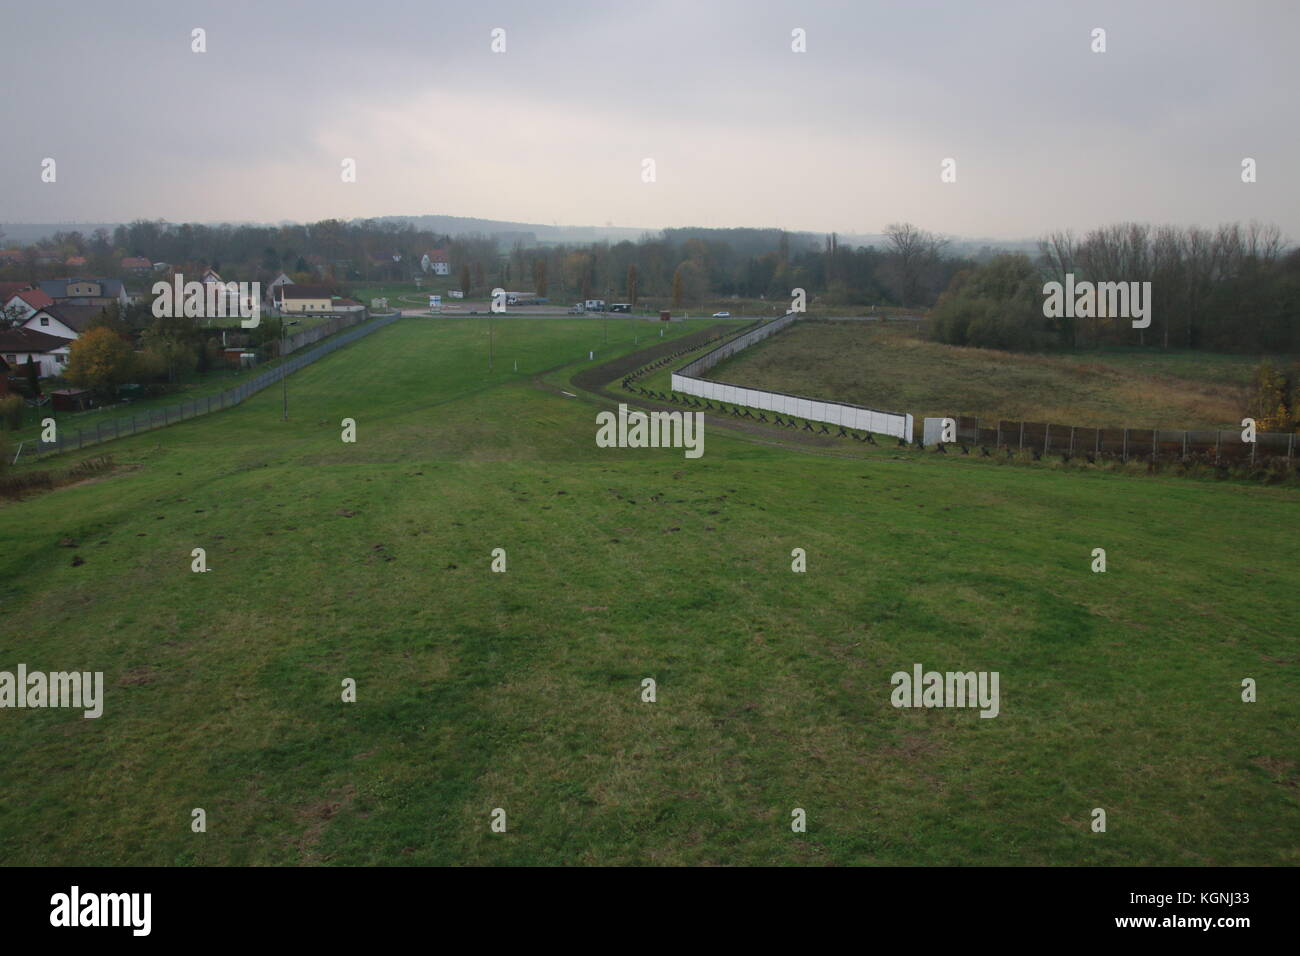 Hötensleben, Germany. 9th Nov, 2017. The Border Memorial Hötensleben. It show characteristic barrier system erected by the GDR border regime. In Germany the wall fell 28 years ago, on 9 November 1989. Credit: Mattis Kaminer/Alamy Live News Stock Photo